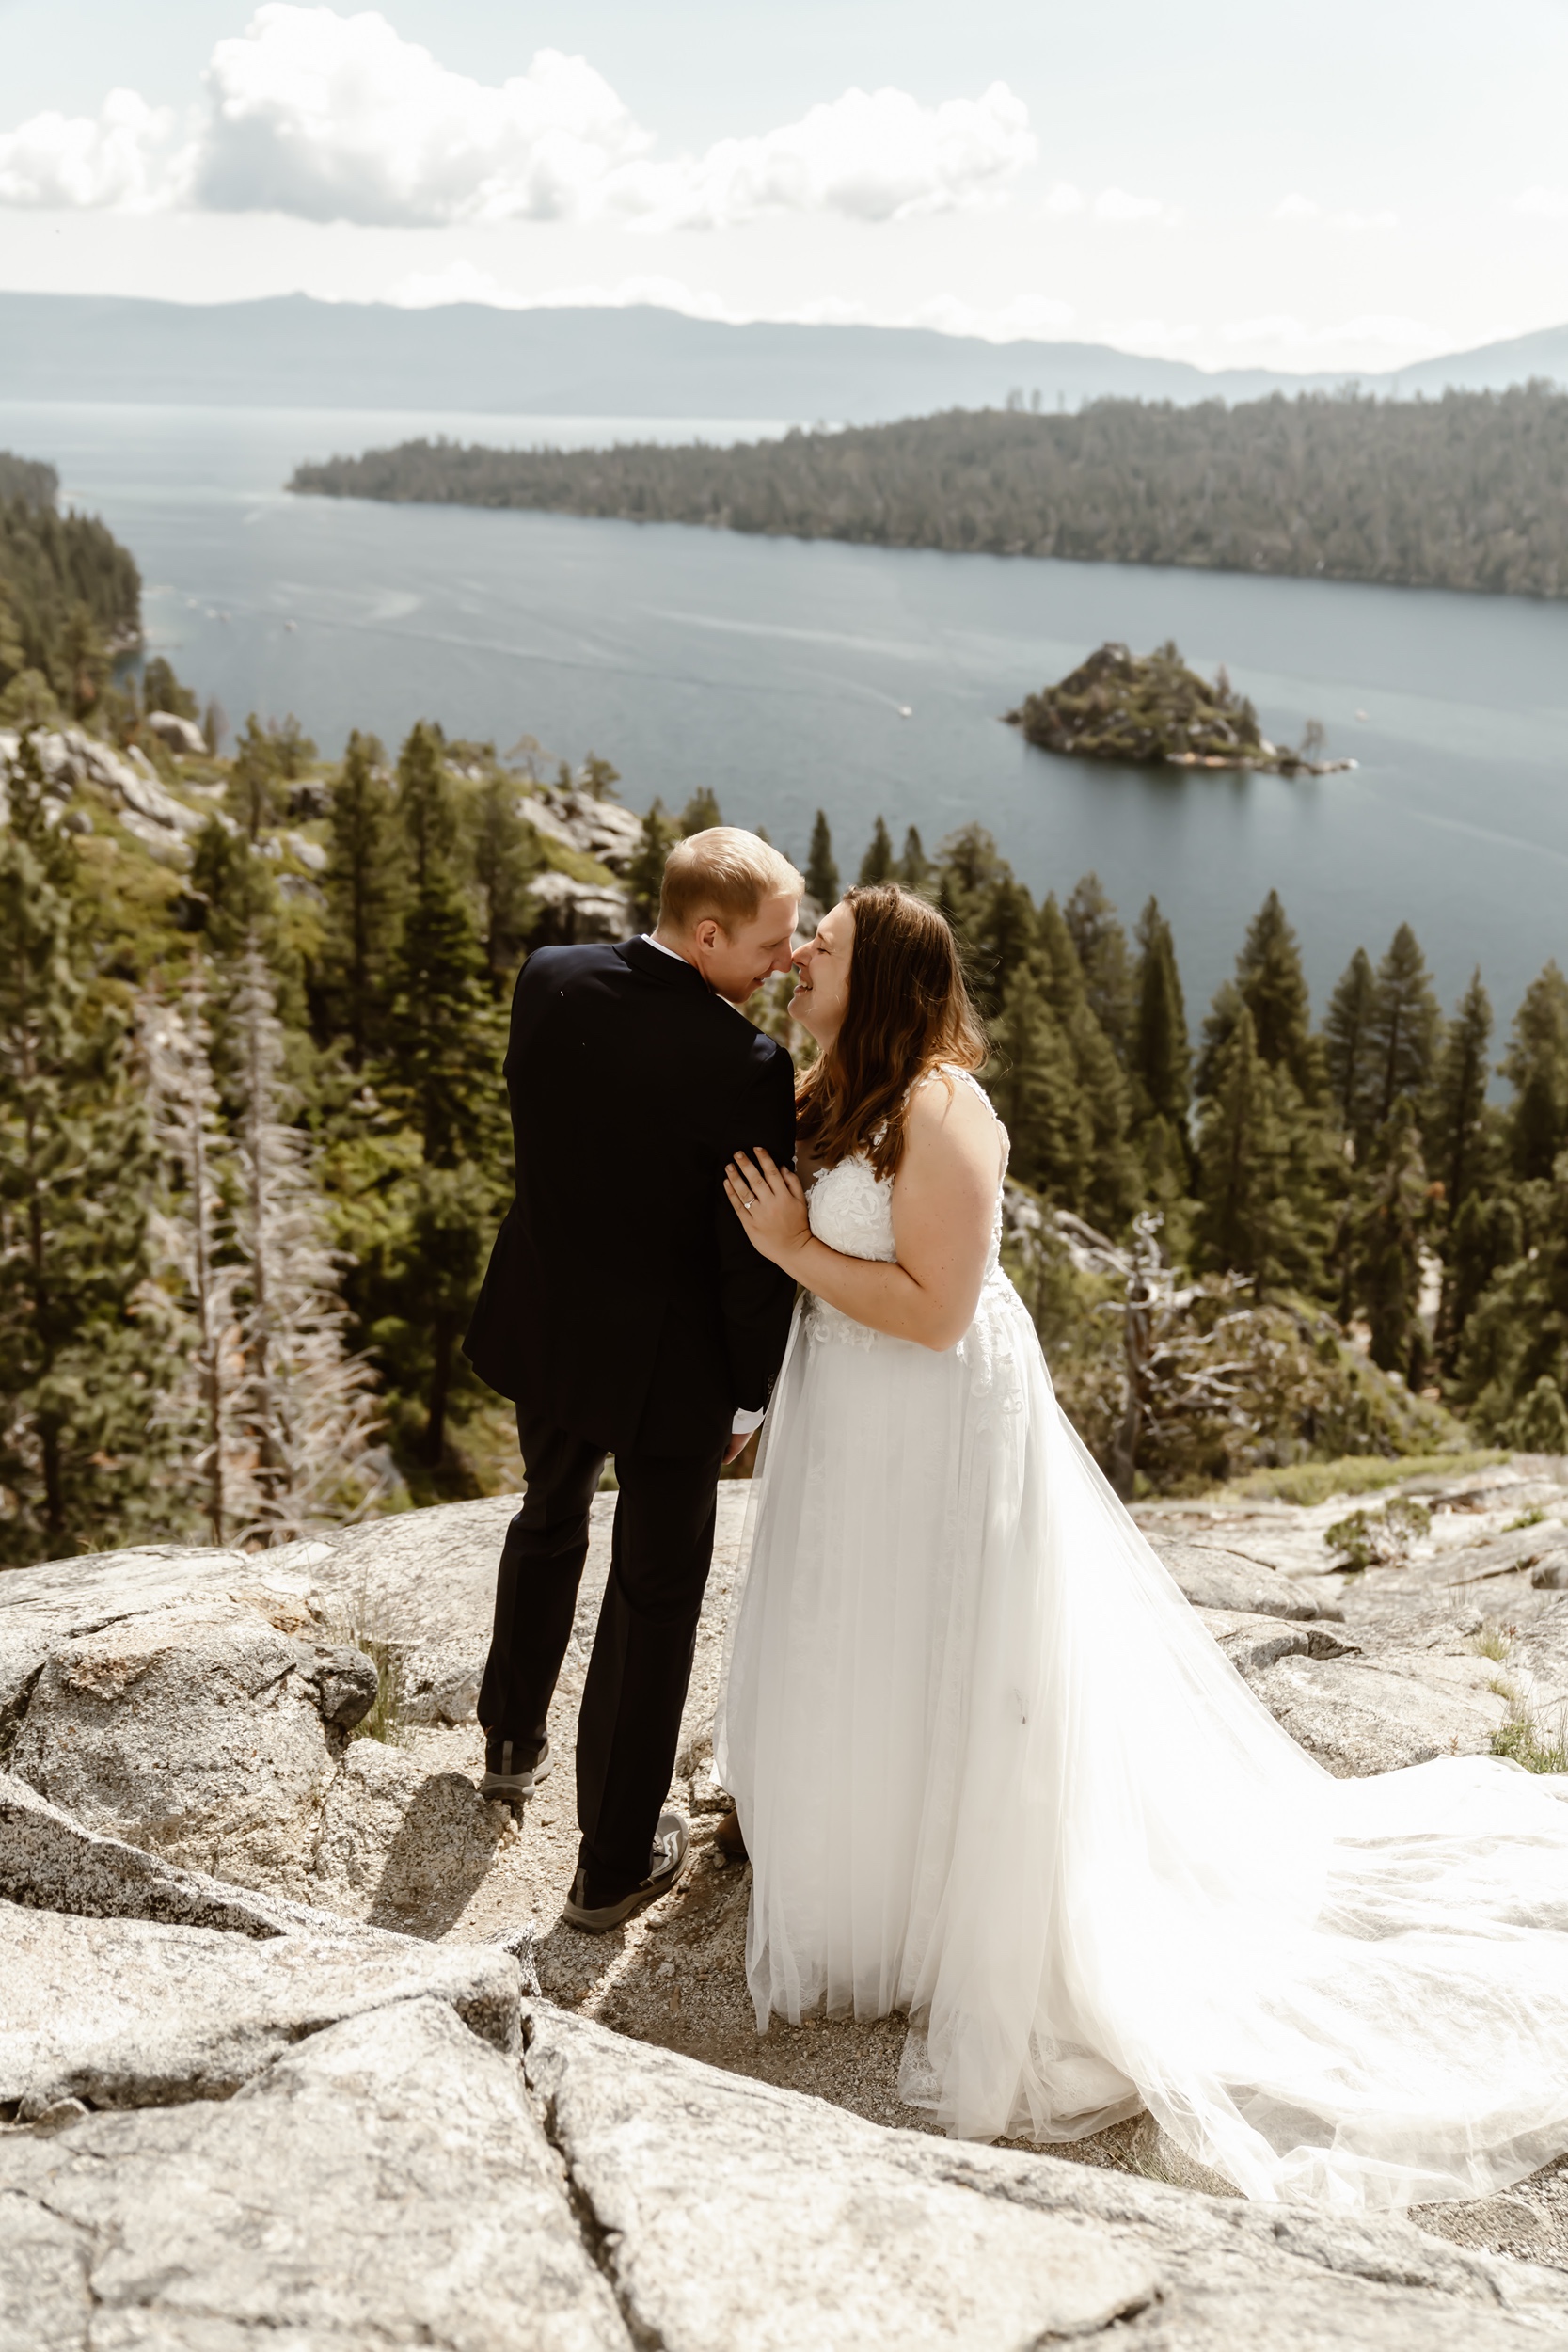 Bride and groom kiss with Emerald Bay elopement backdrop